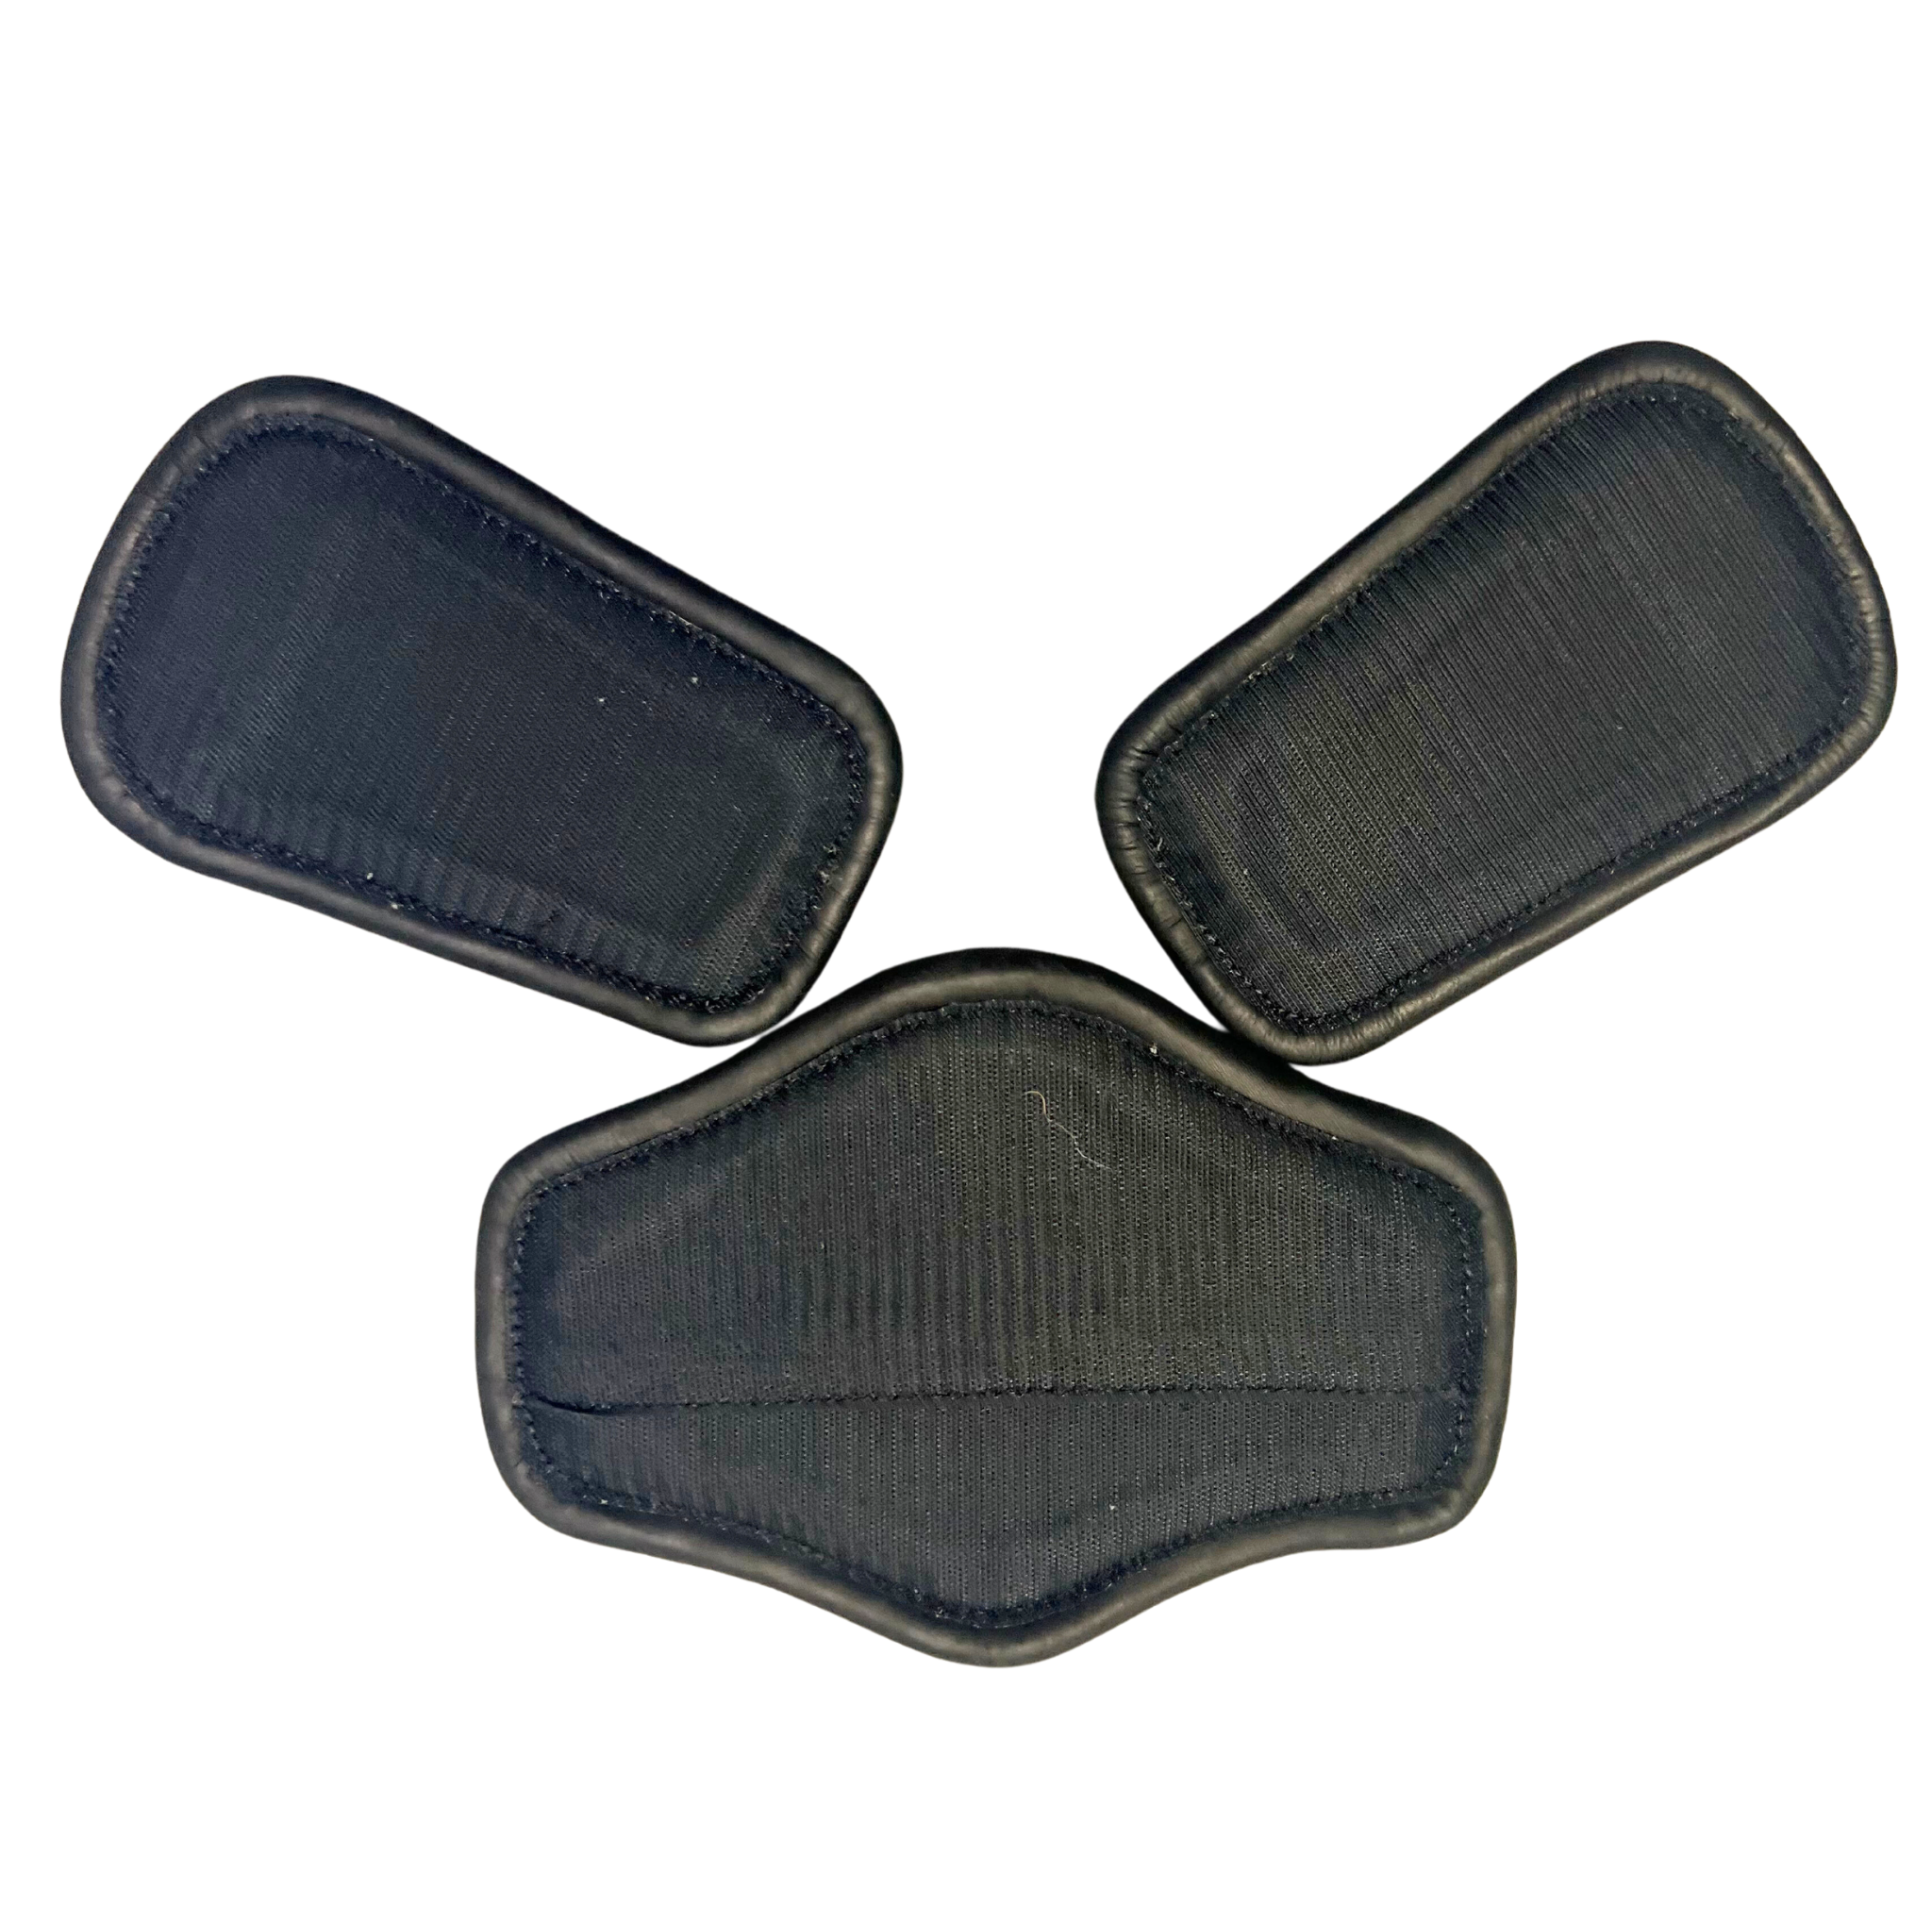 Removable Leather Pads for Short Comfort Girth